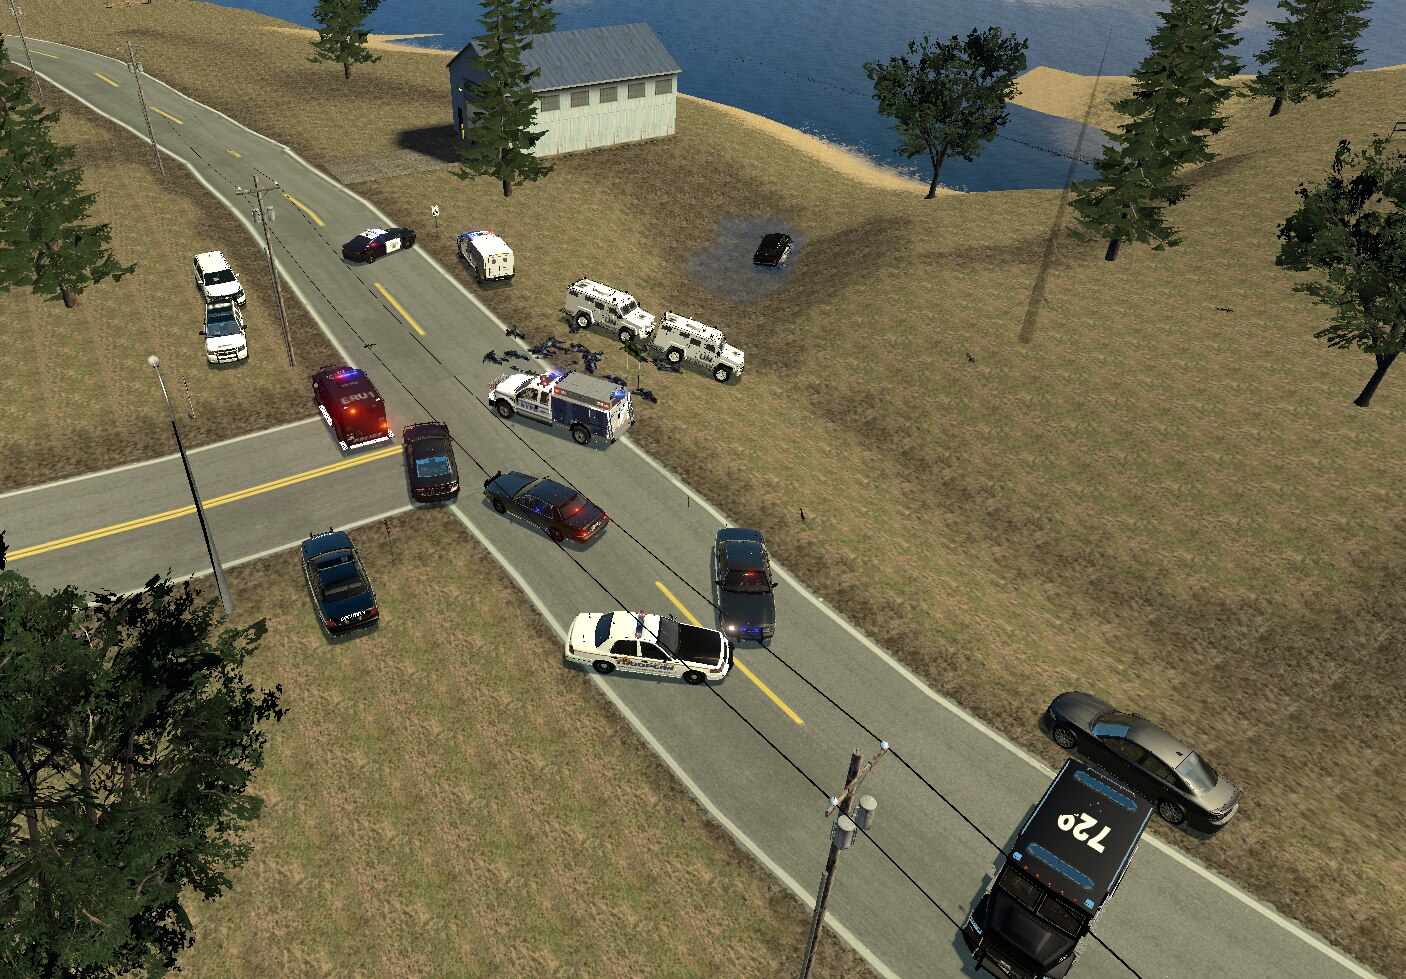 911 Highway Traffic Police Car Drive and Smash 3D Parking Simulator game::Appstore  for Android